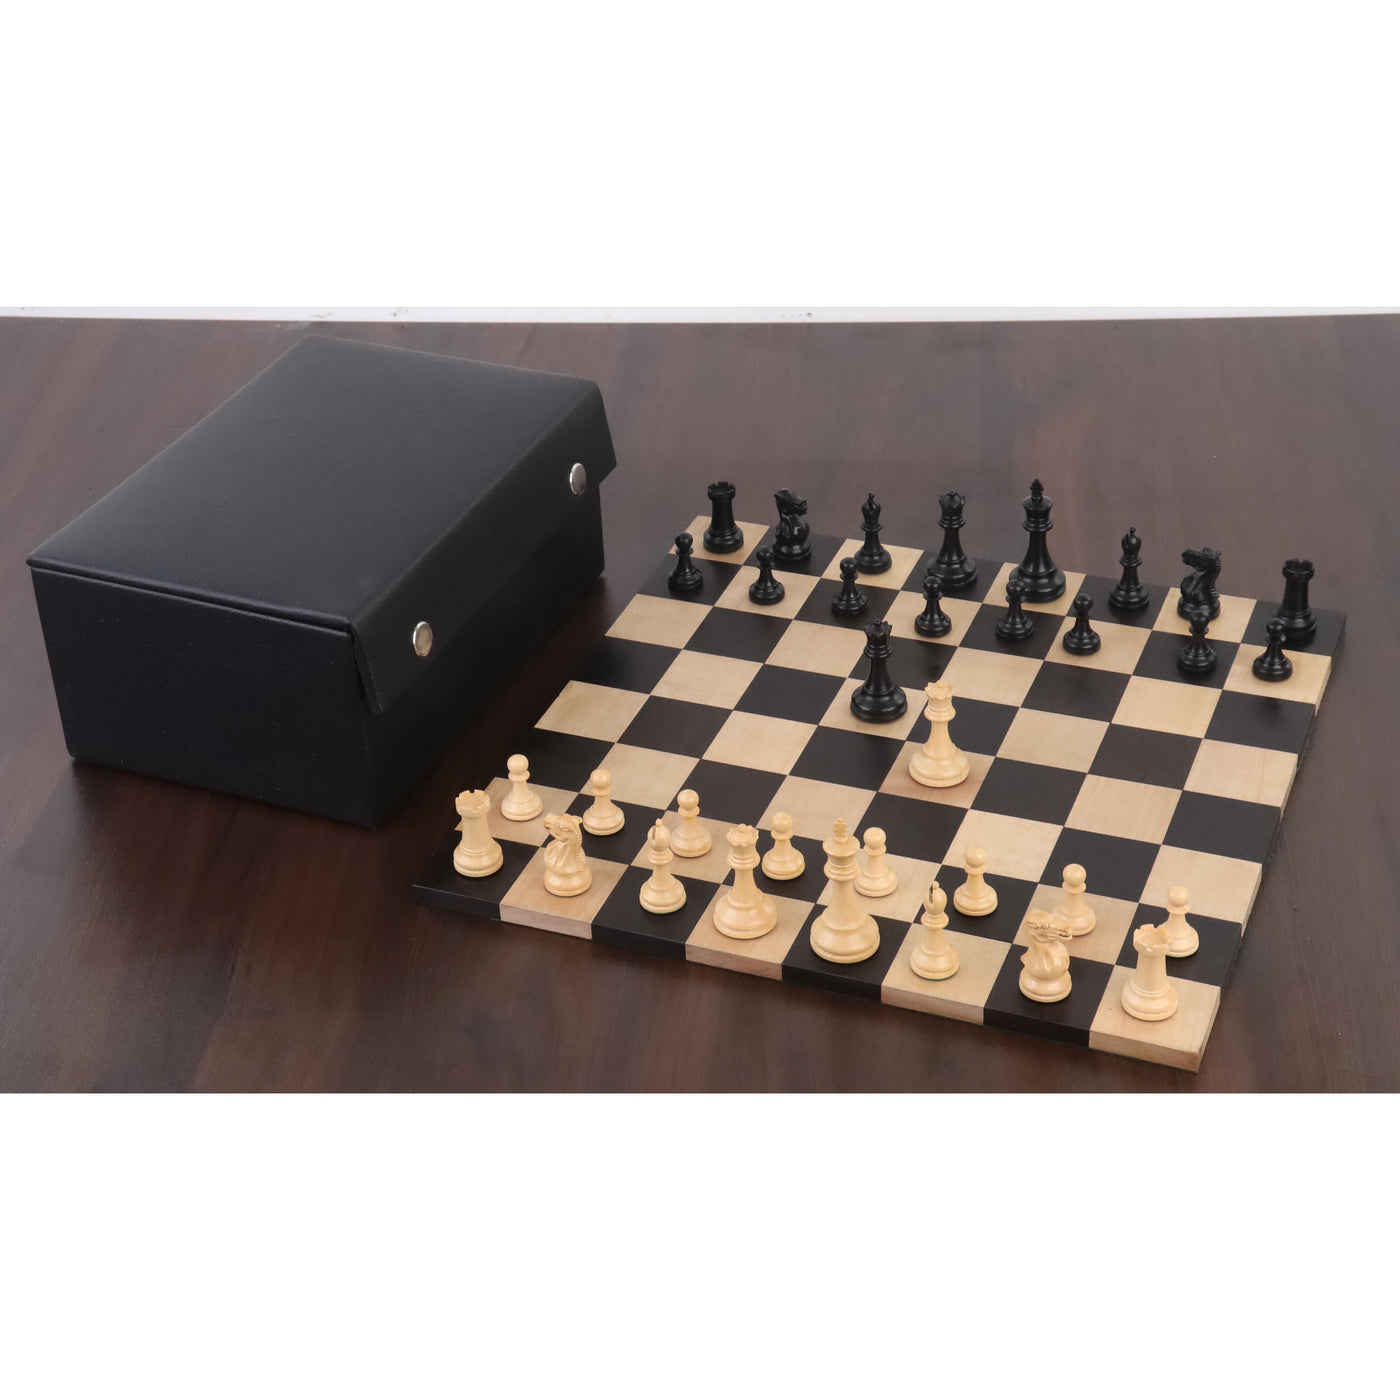 2.4" Pro Staunton Weighted Wooden Chess Set - Chess Pieces Only - Ebonised Boxwood